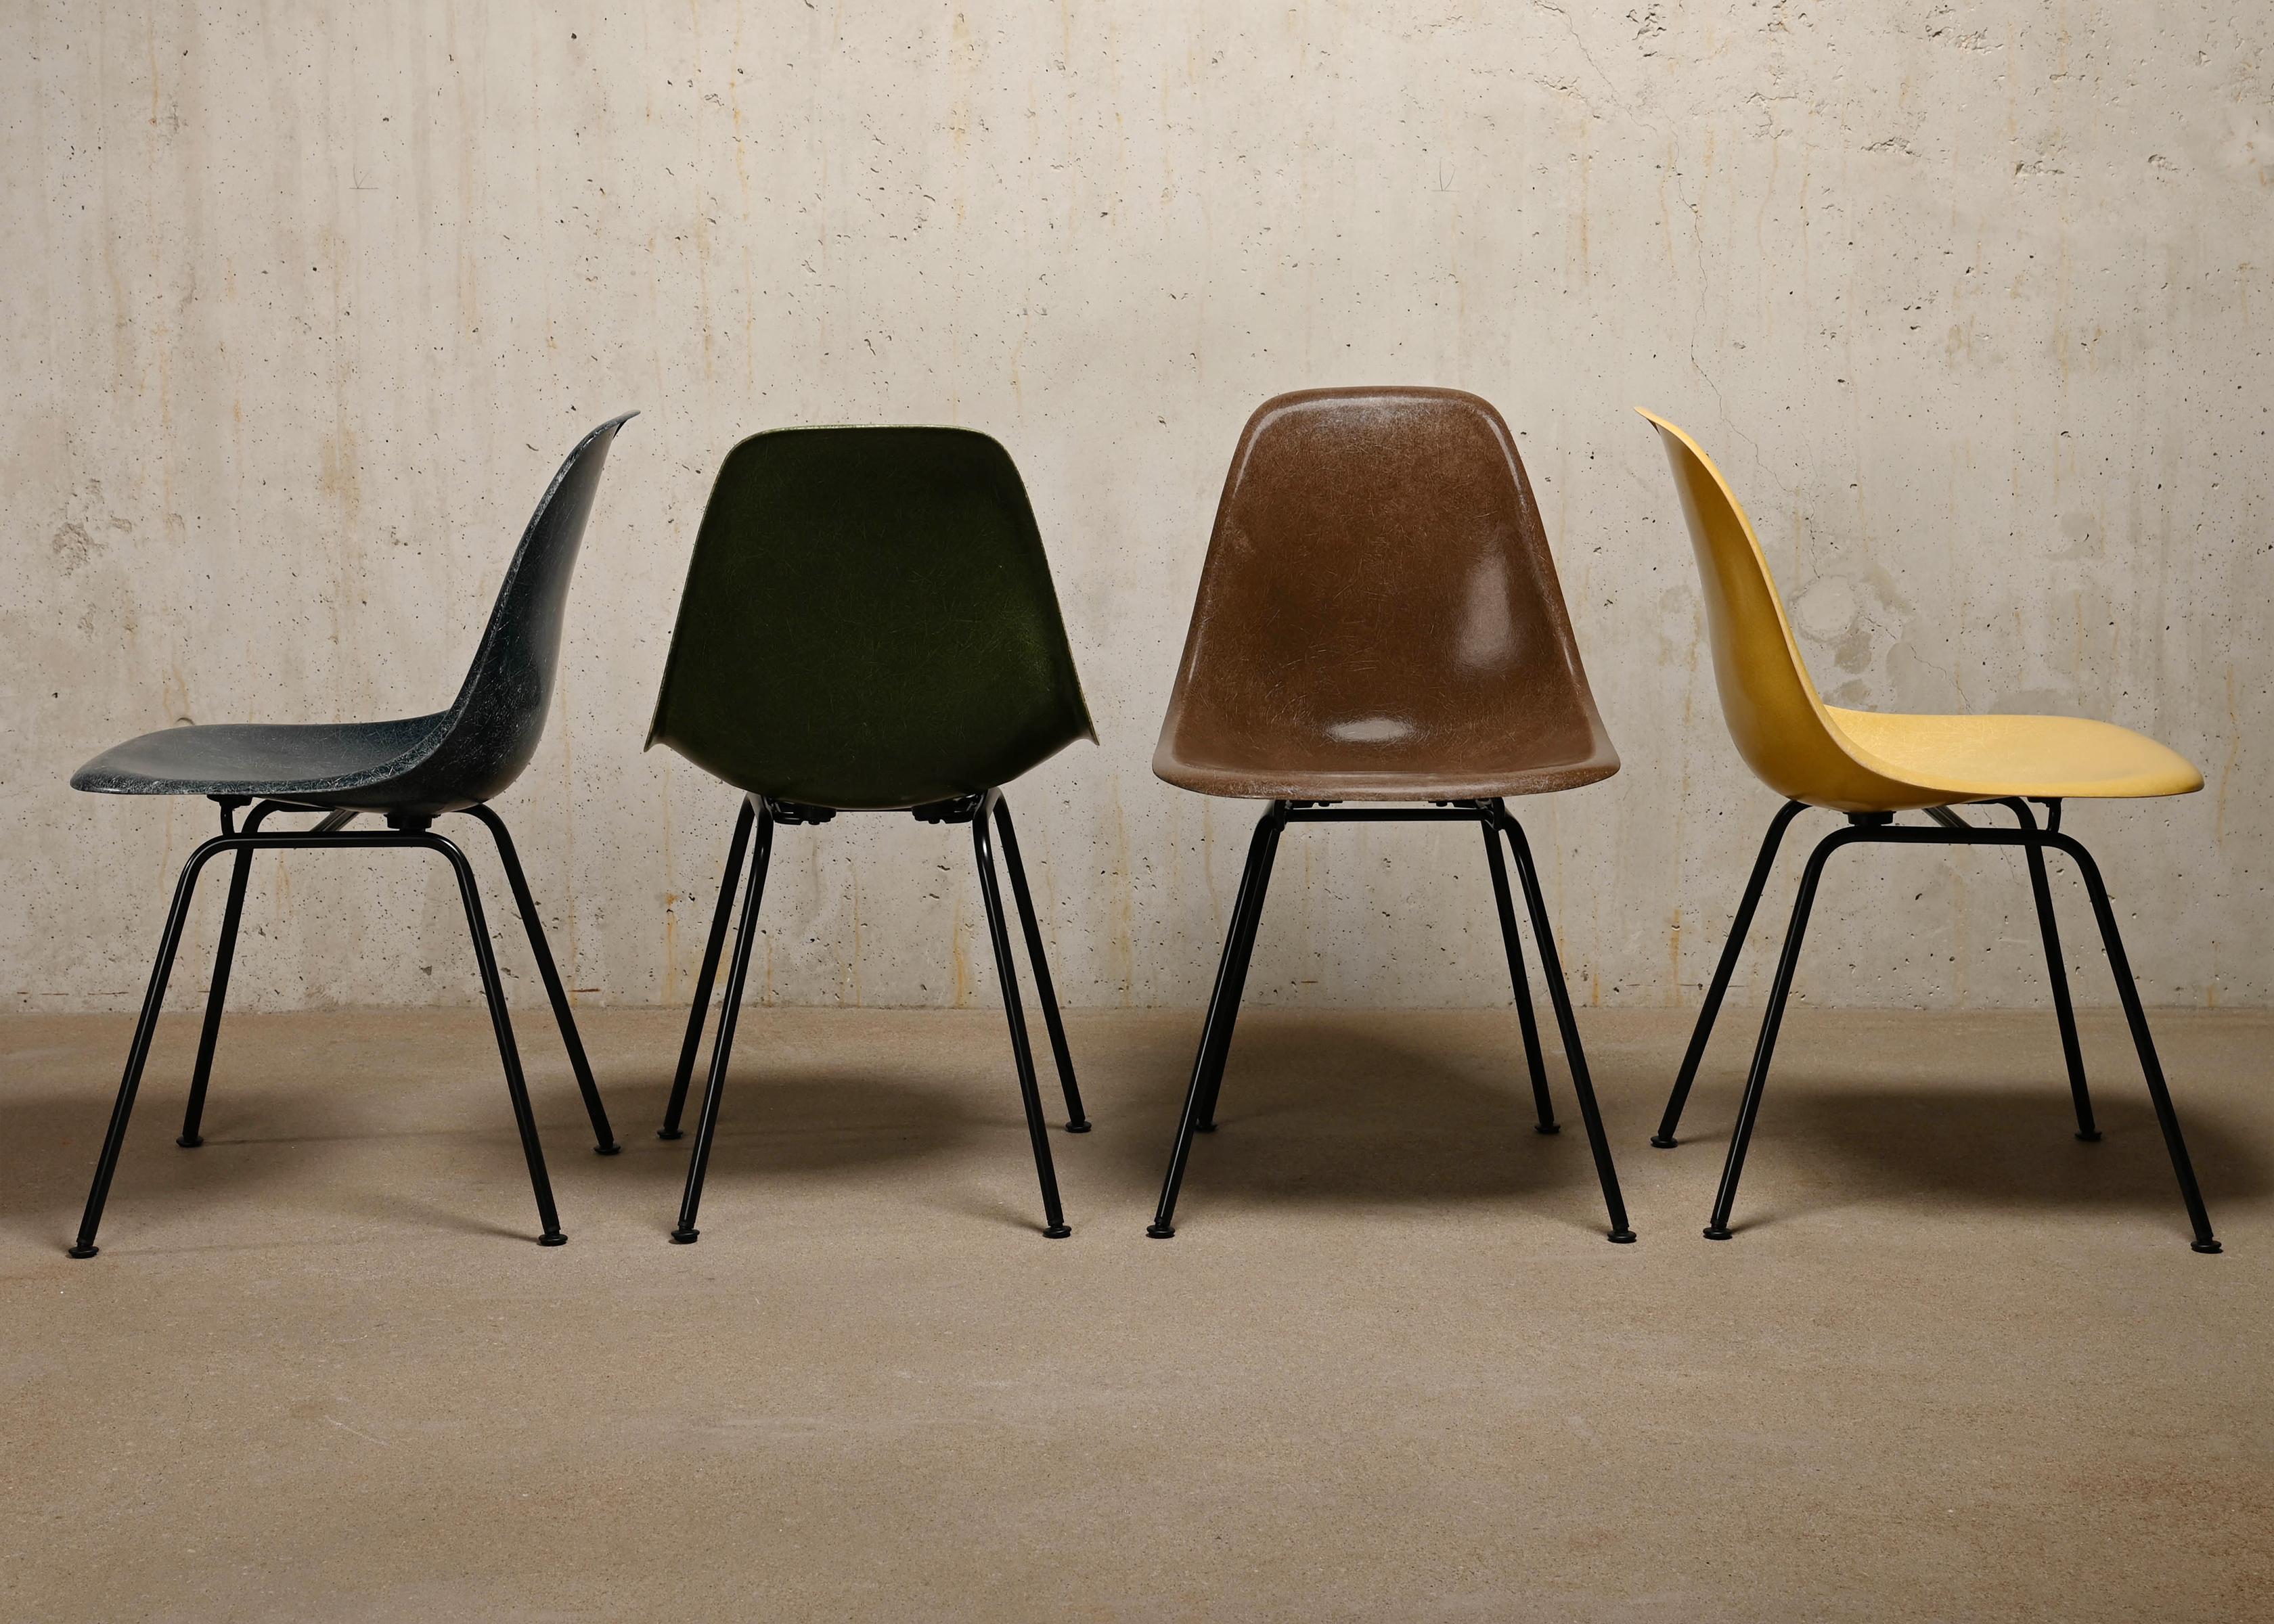 Iconic side chairs designed by Charles and Ray Eames for Herman Miller. Molded fiberglass shells in the colours: Navy Blue, Ochre Light, Seal Brown and Olive Green Dark. Assembled on newly powder coated bases in basic dark. The chairs are in very